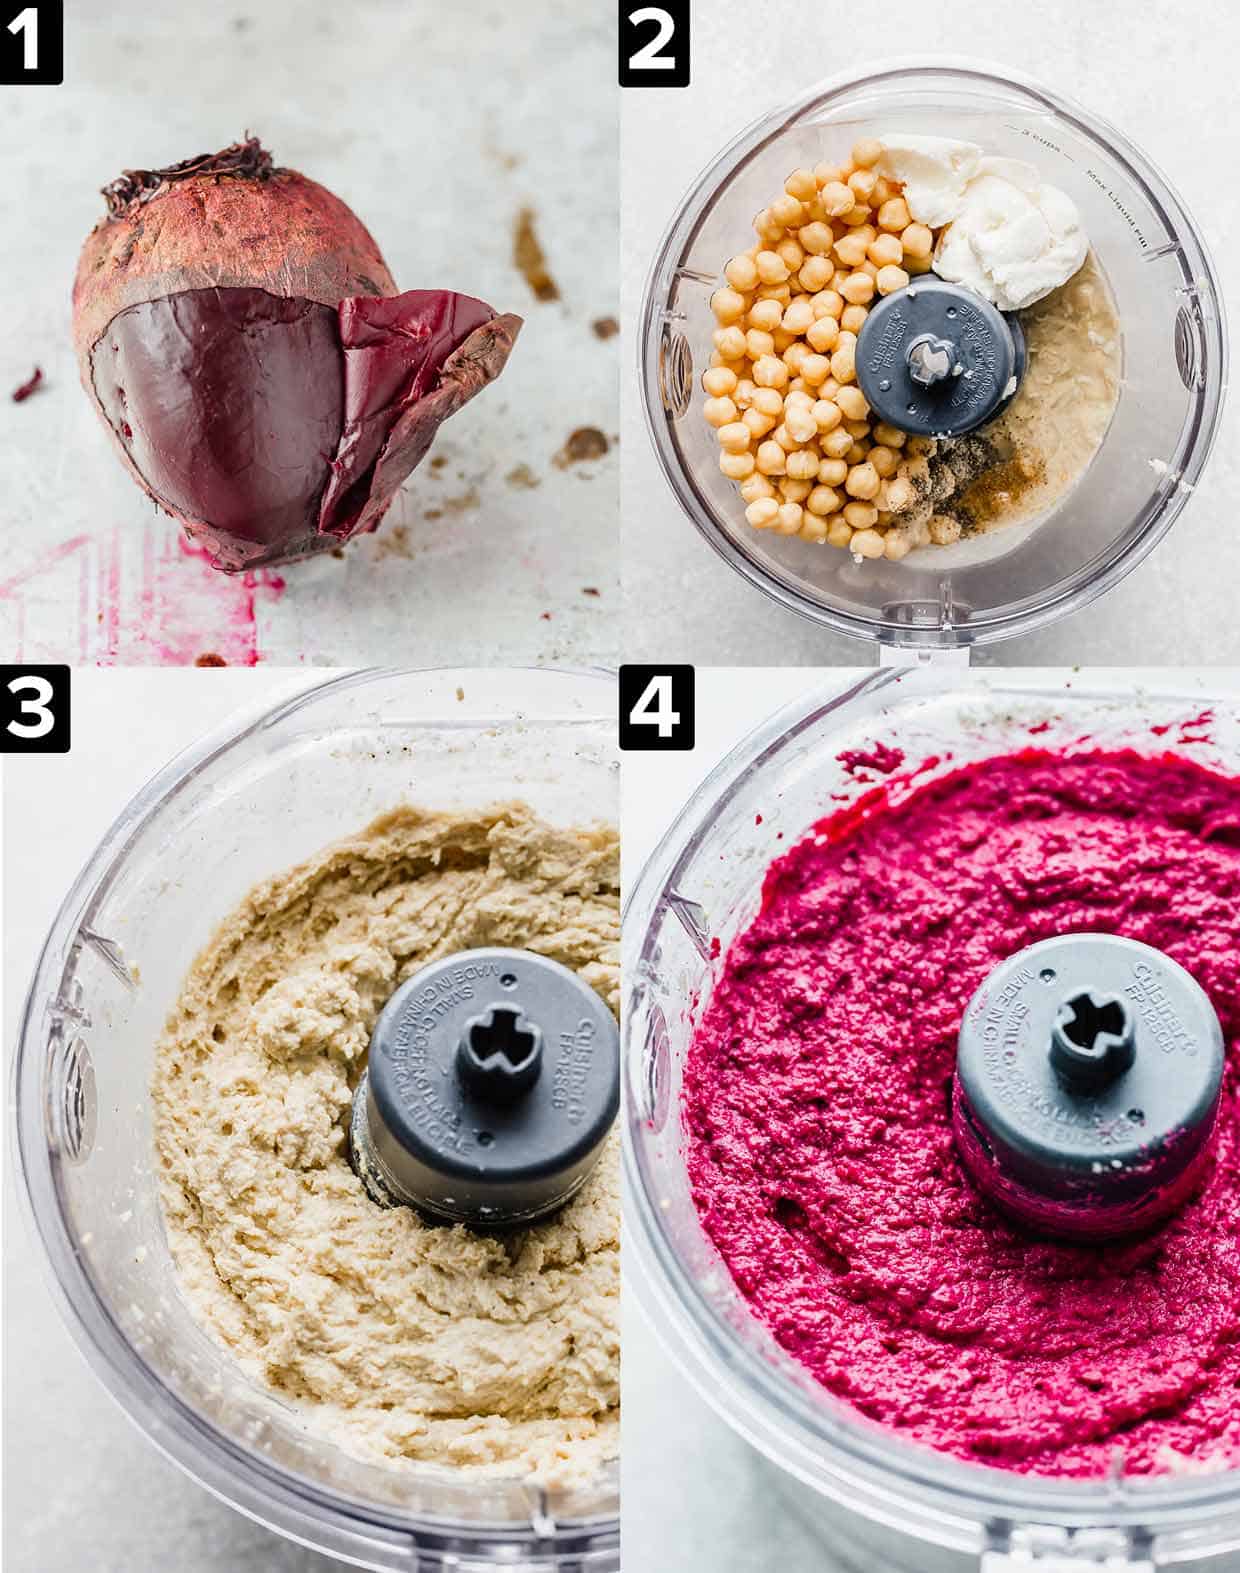 Four images showing how to make Beet Hummus. Top left is a baked beet with the skin coming off. Top right image is chickpeas, tahini, and ricotta in a food process. Bottom left is mixture just stated mixed. Bottom right tis bright purple Beet Hummus in a food processor.